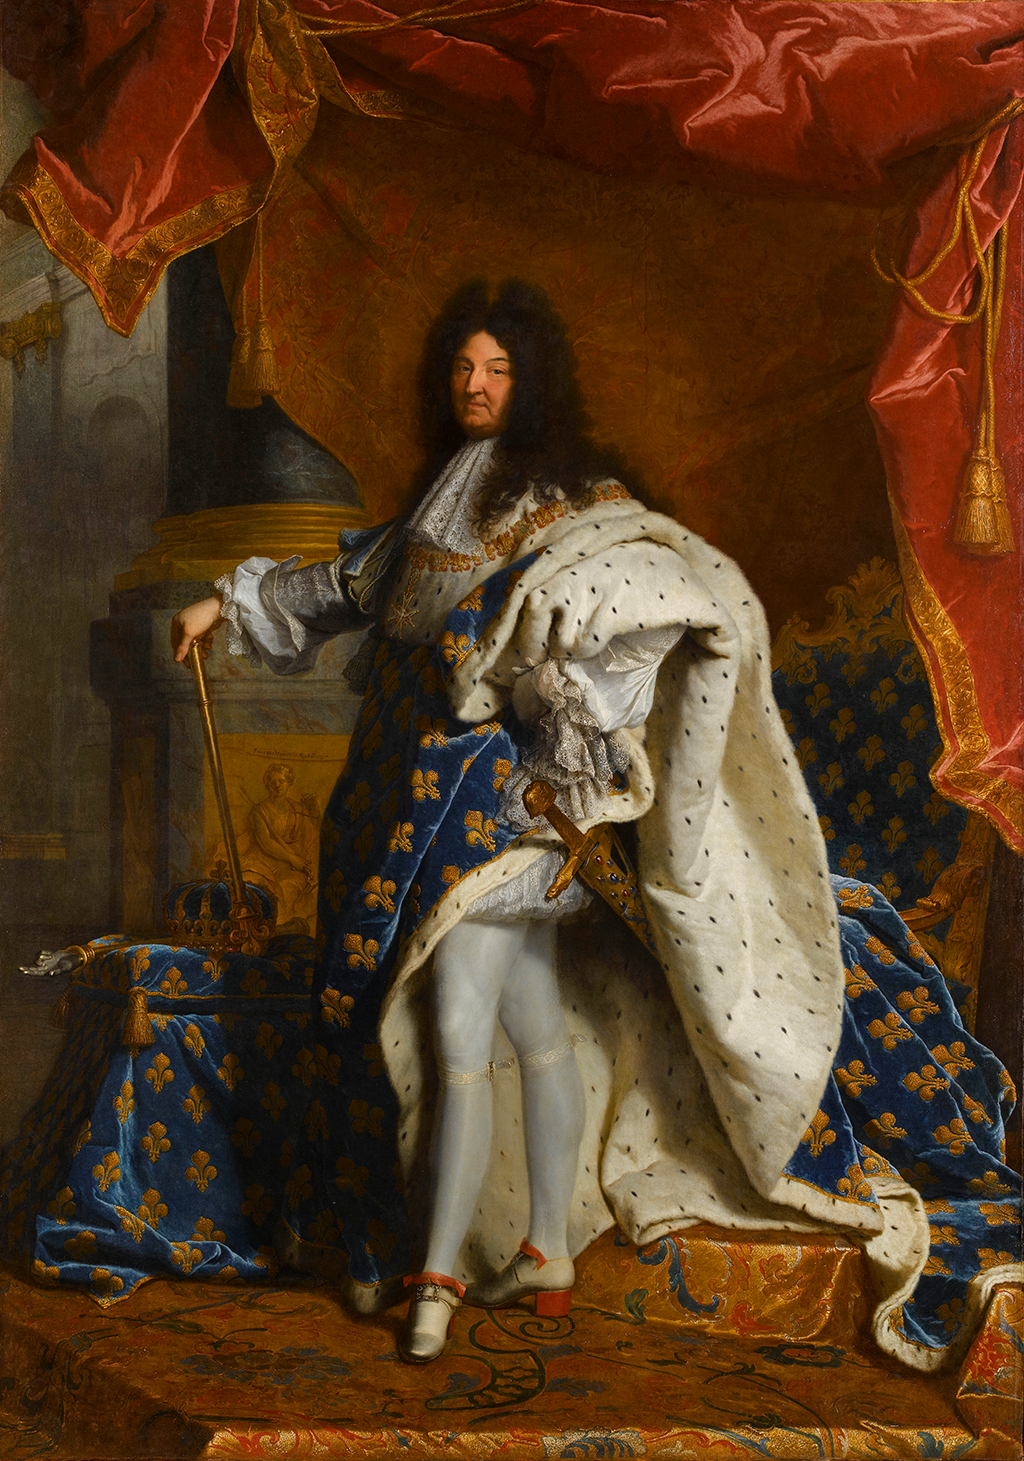 A full-length portrait of a man, standing with a golden scepter in his right hand, and his left hand on his hip. He wears a long blue cape with a gold fleur-de-lis pattern that is lined with white ermine fur which drapes over his left shoulder. The man has long curly black hair which reaches past his shoulders. He has a golden sword attached to his left hip and wears tight white stockings and white shoes with red heels. Hanging from the ceiling above him is a large red cloth tied with gold tassels. A footstool upholstered in the blue fleur-de-lis fabric supports a gold and blue crown, and behind him is a golden throne, also upholstered in the blue fleur-d-lis fabric.